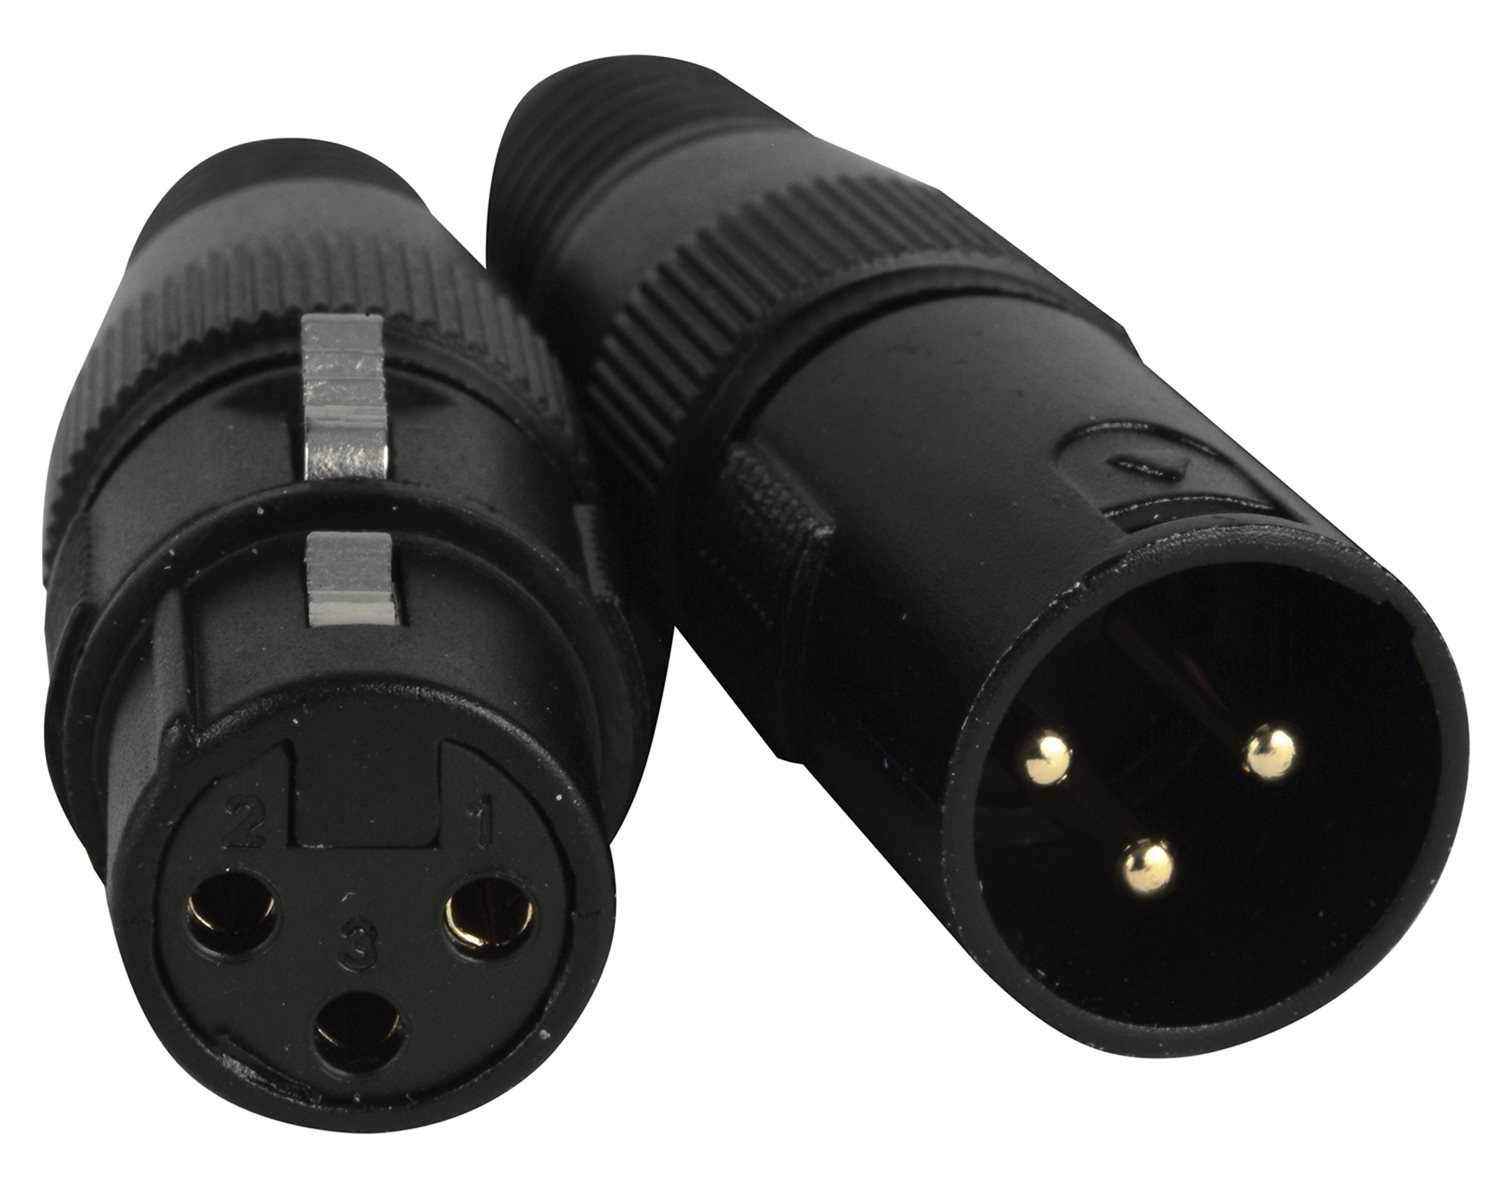 Accu-Cable 3-Pin Male & Female DMX Connector Pack - ProSound and Stage Lighting